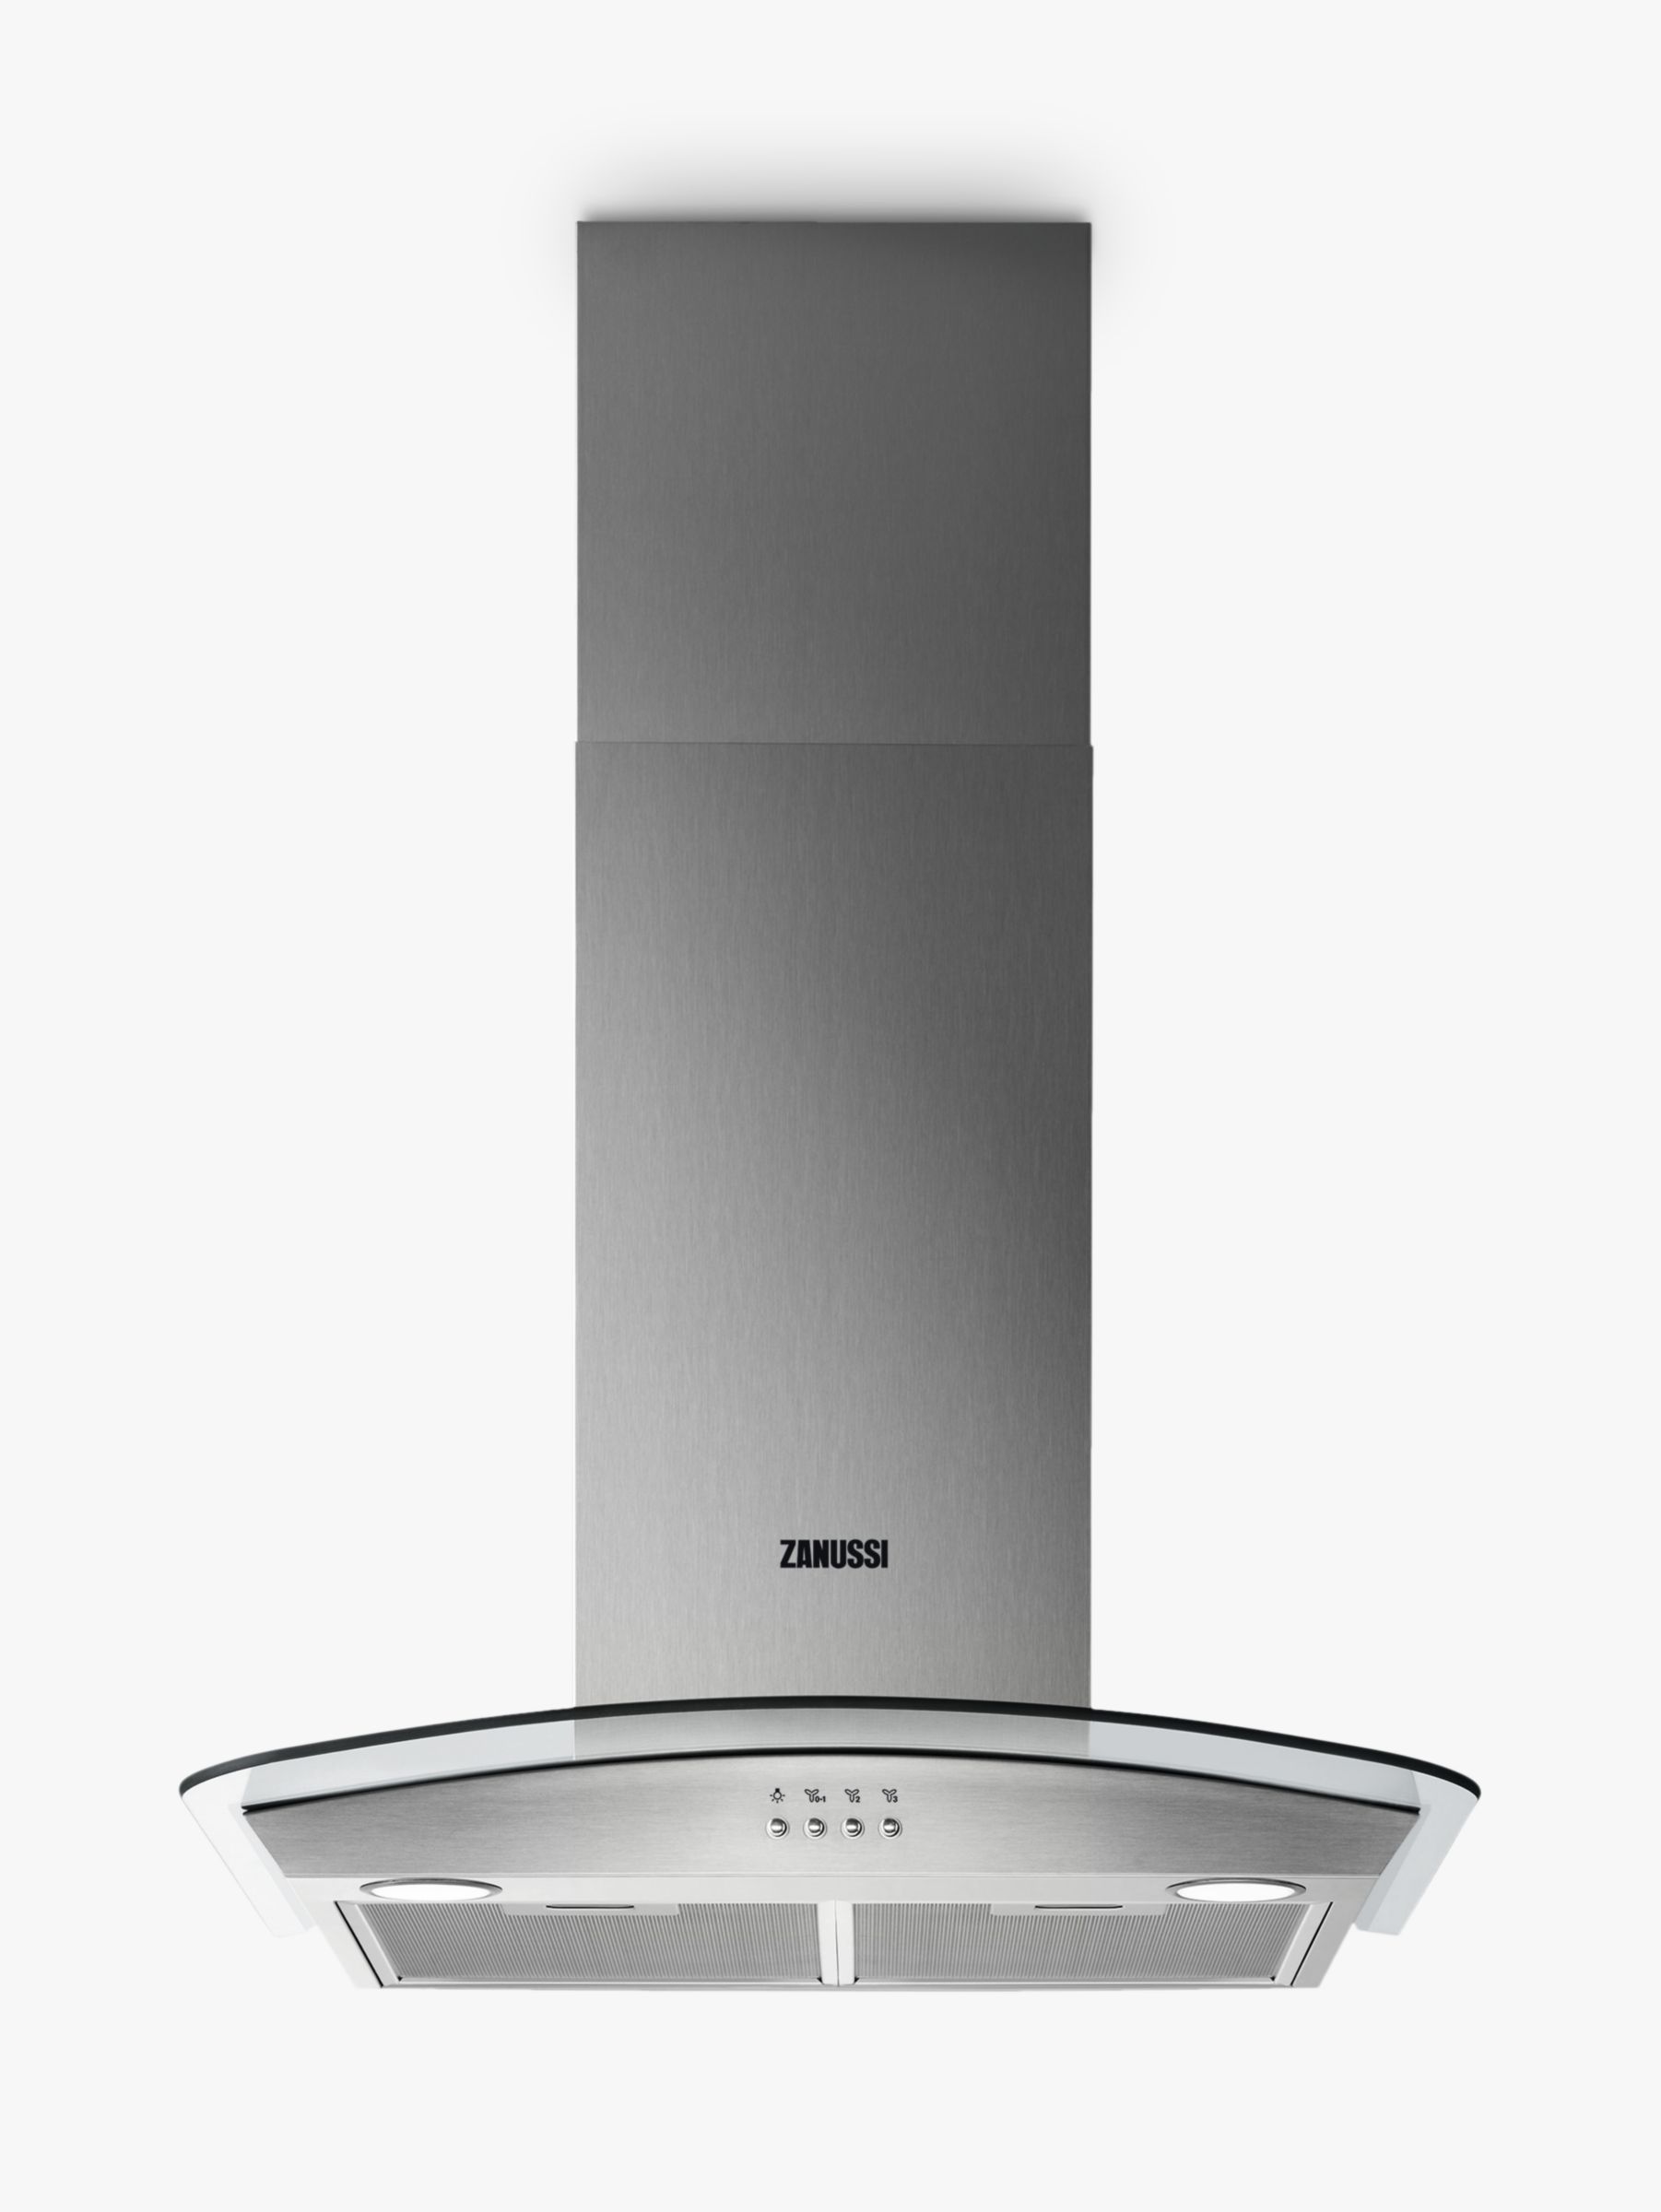 Zanussi ZHC62352X  Rated  Cooker Hood Stainless Steel